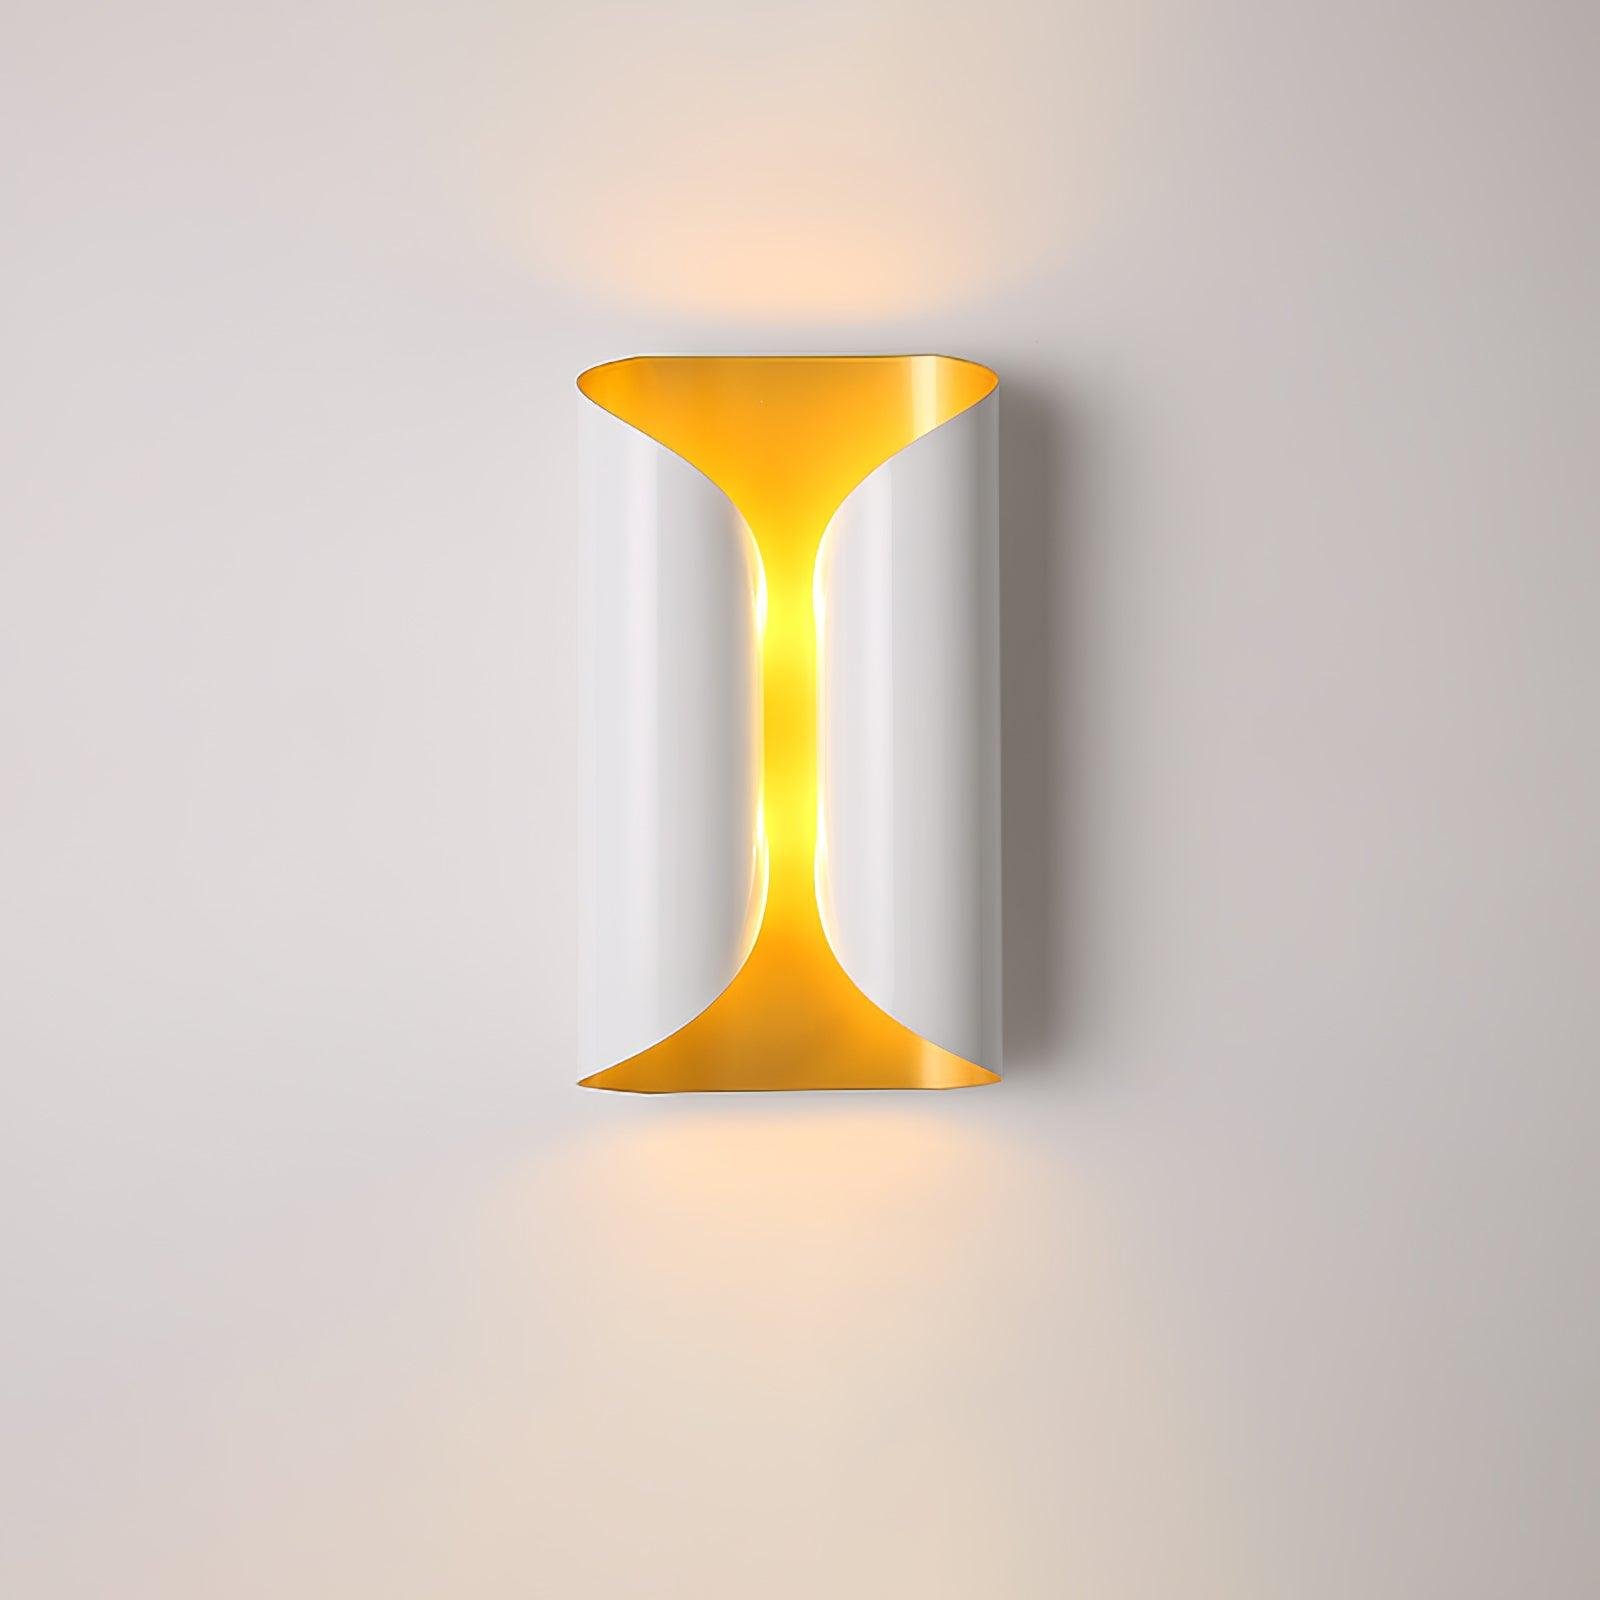 Lux Wall Light in White or Gold, measuring 7.1" in width and 13.8" in height (18cm x 35cm)